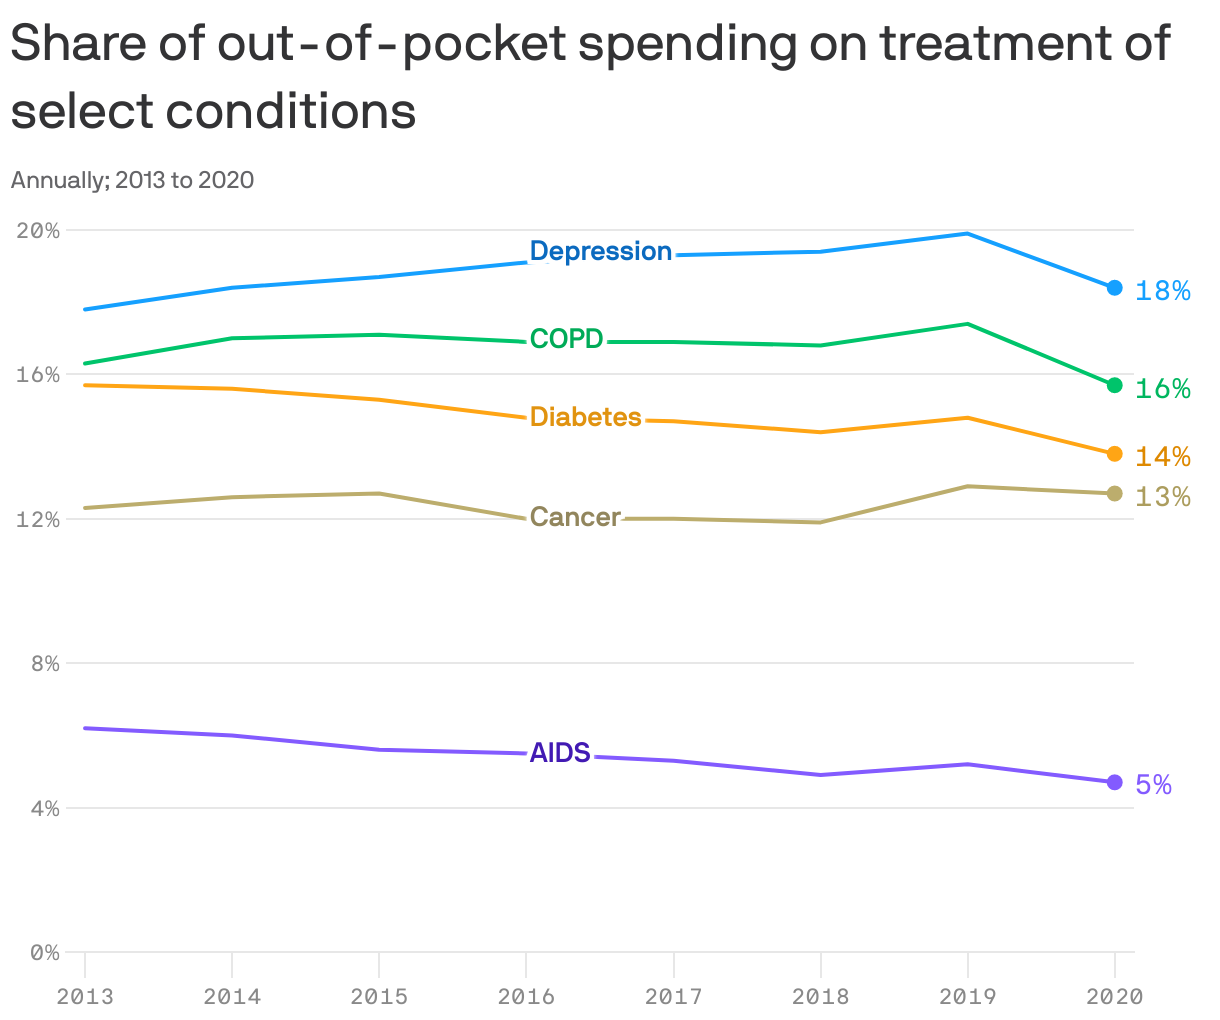 Share of out-of-pocket spending on treatment of select conditions